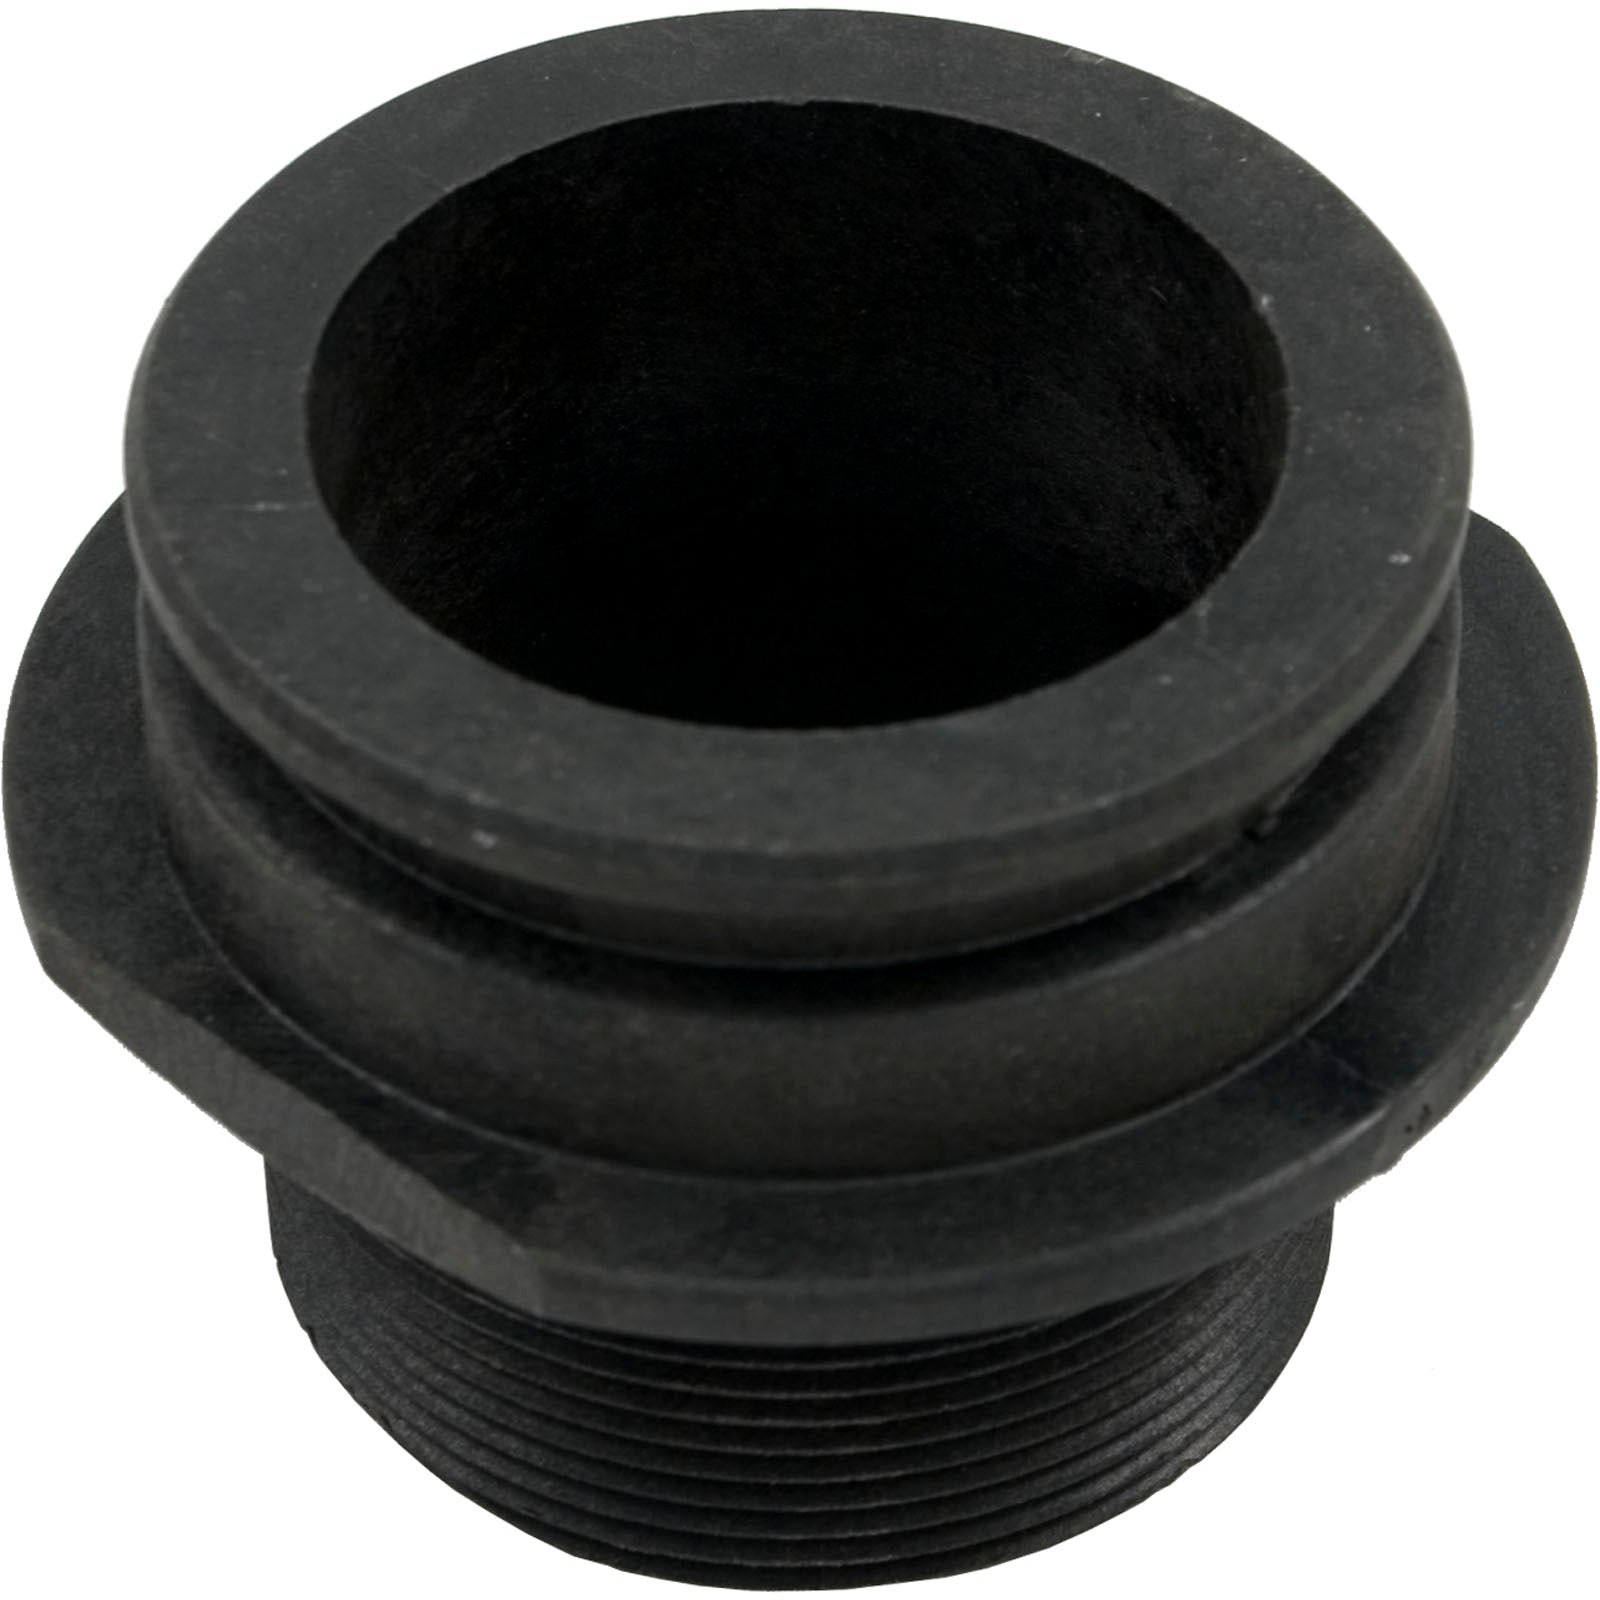 Adapter, Pentair PacFab, 2", 2 required/ 274557